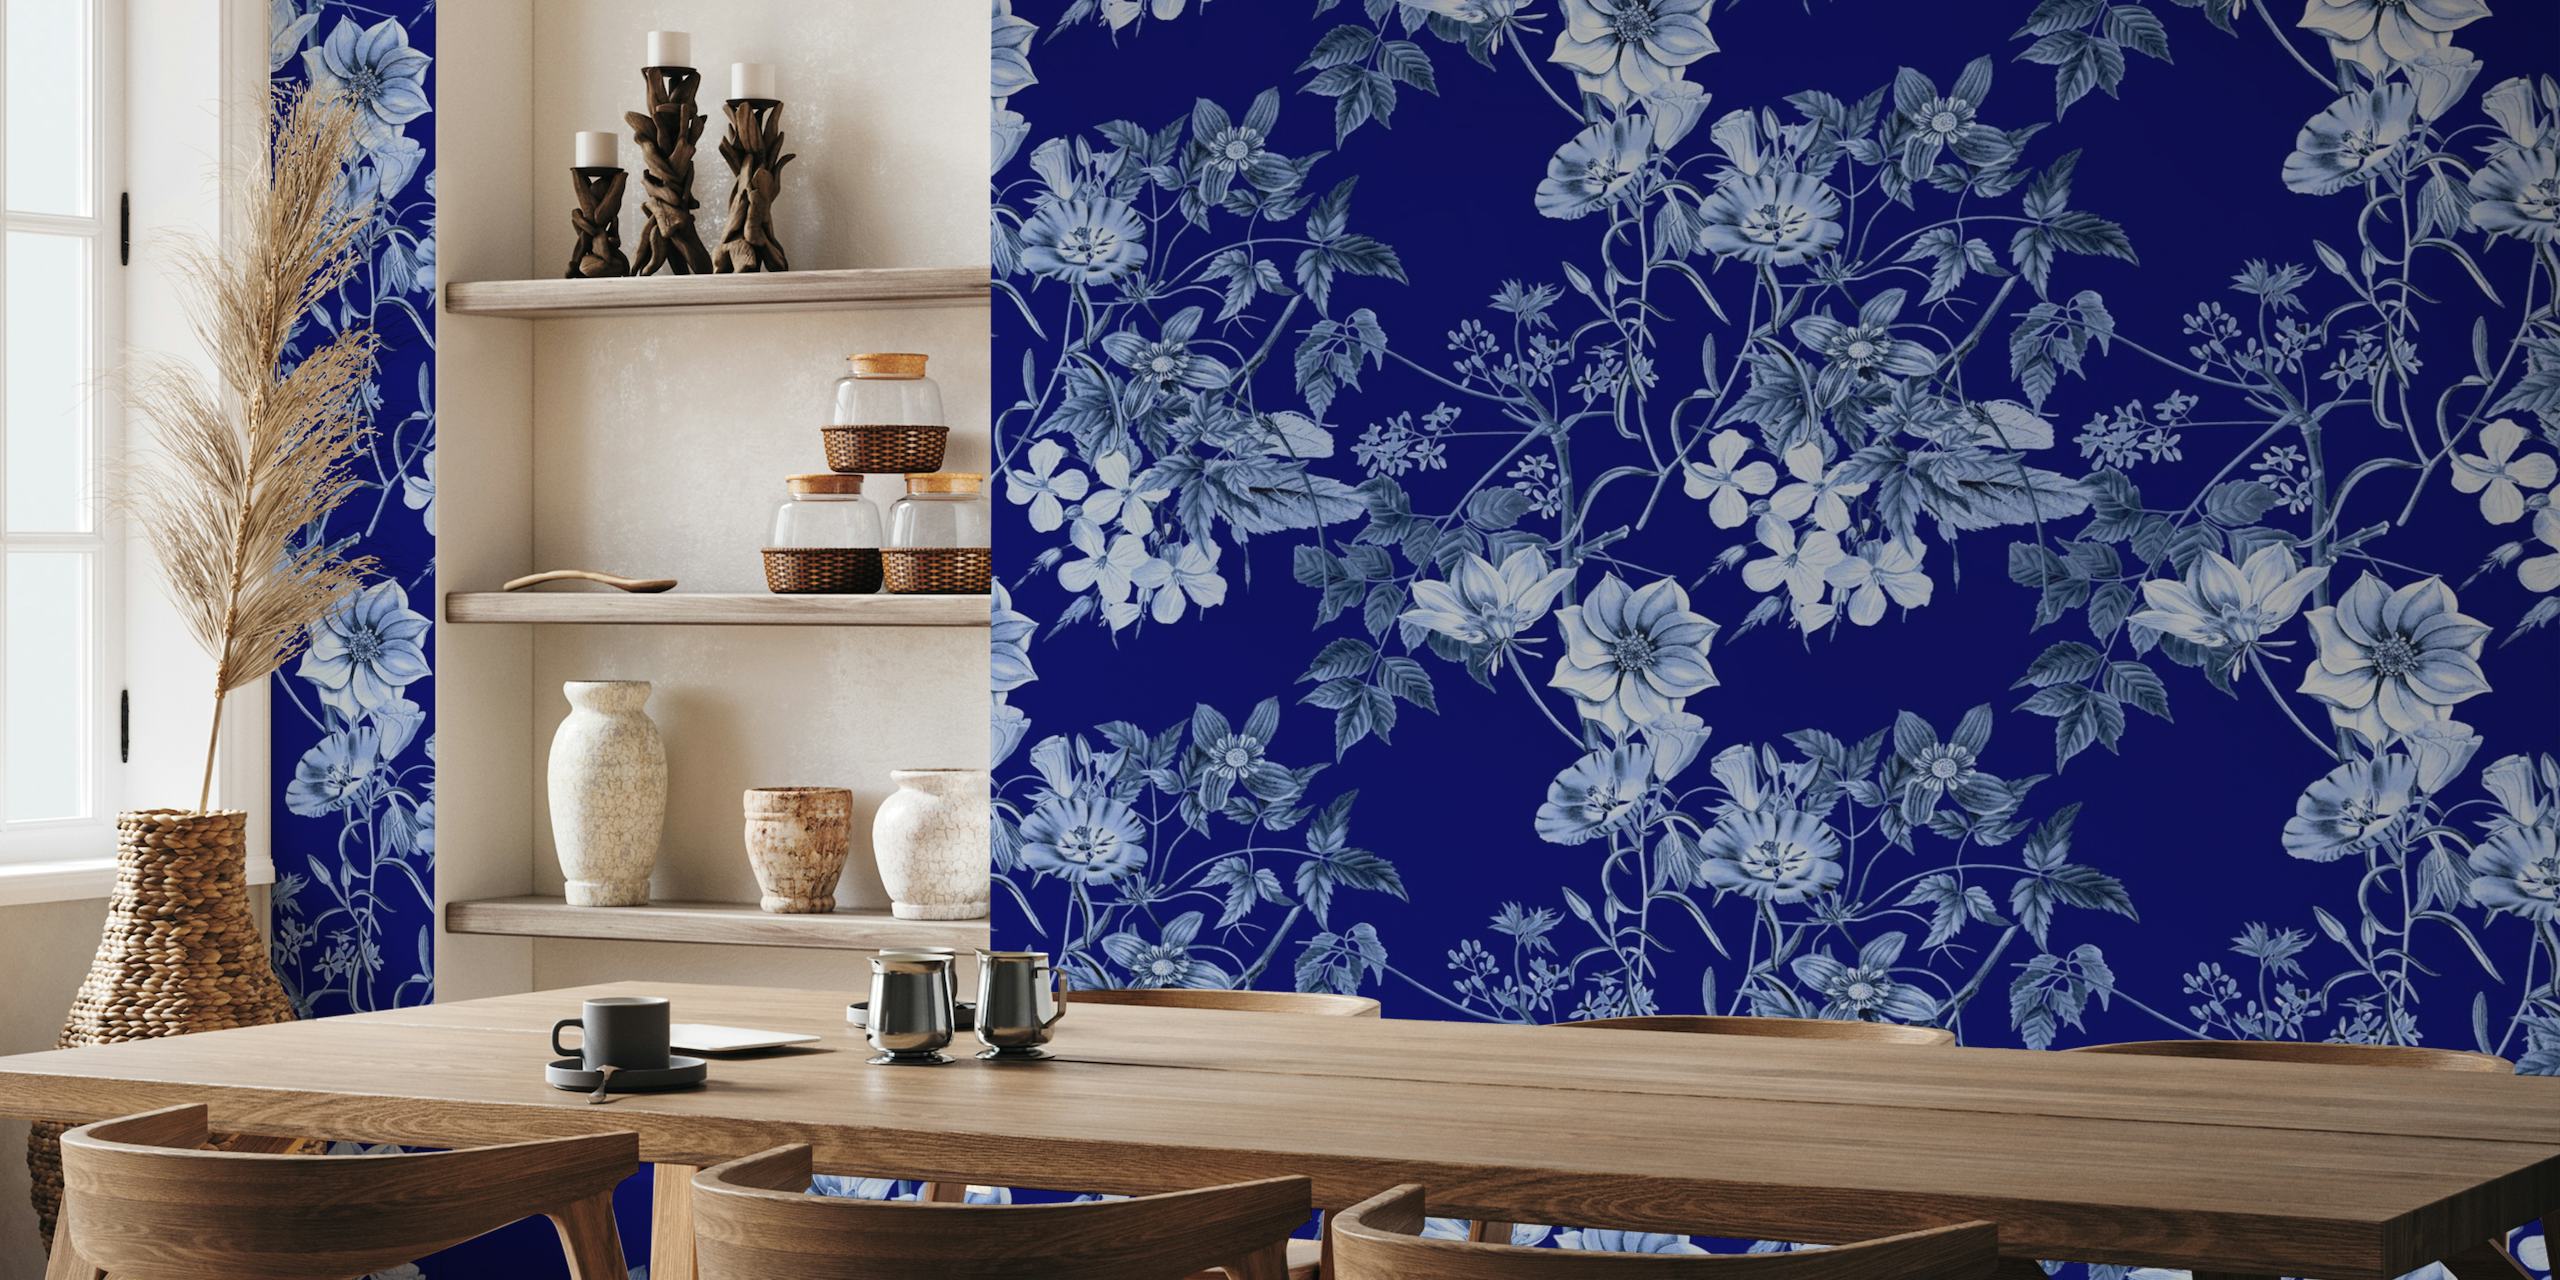 Deep blue floral wall mural with intricate flower pattern design